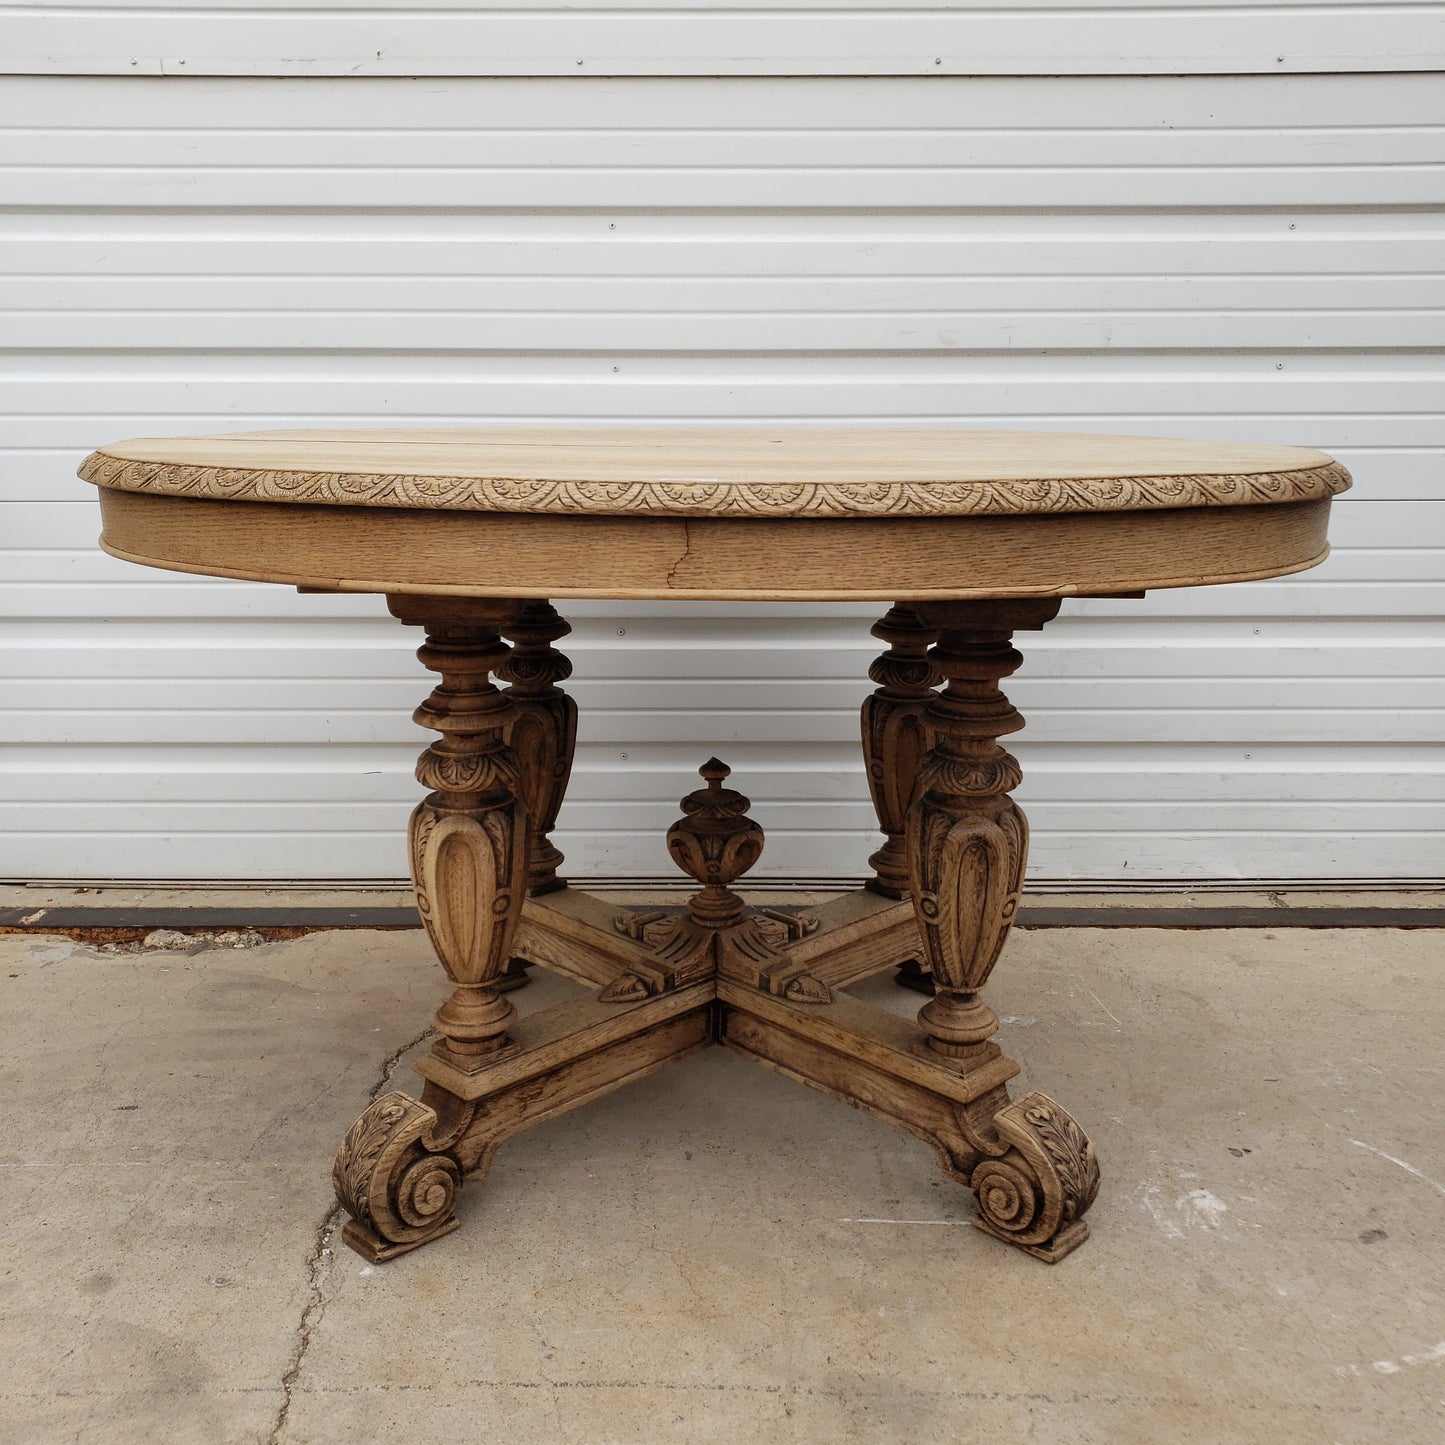 Bleached French Oval Dining Table